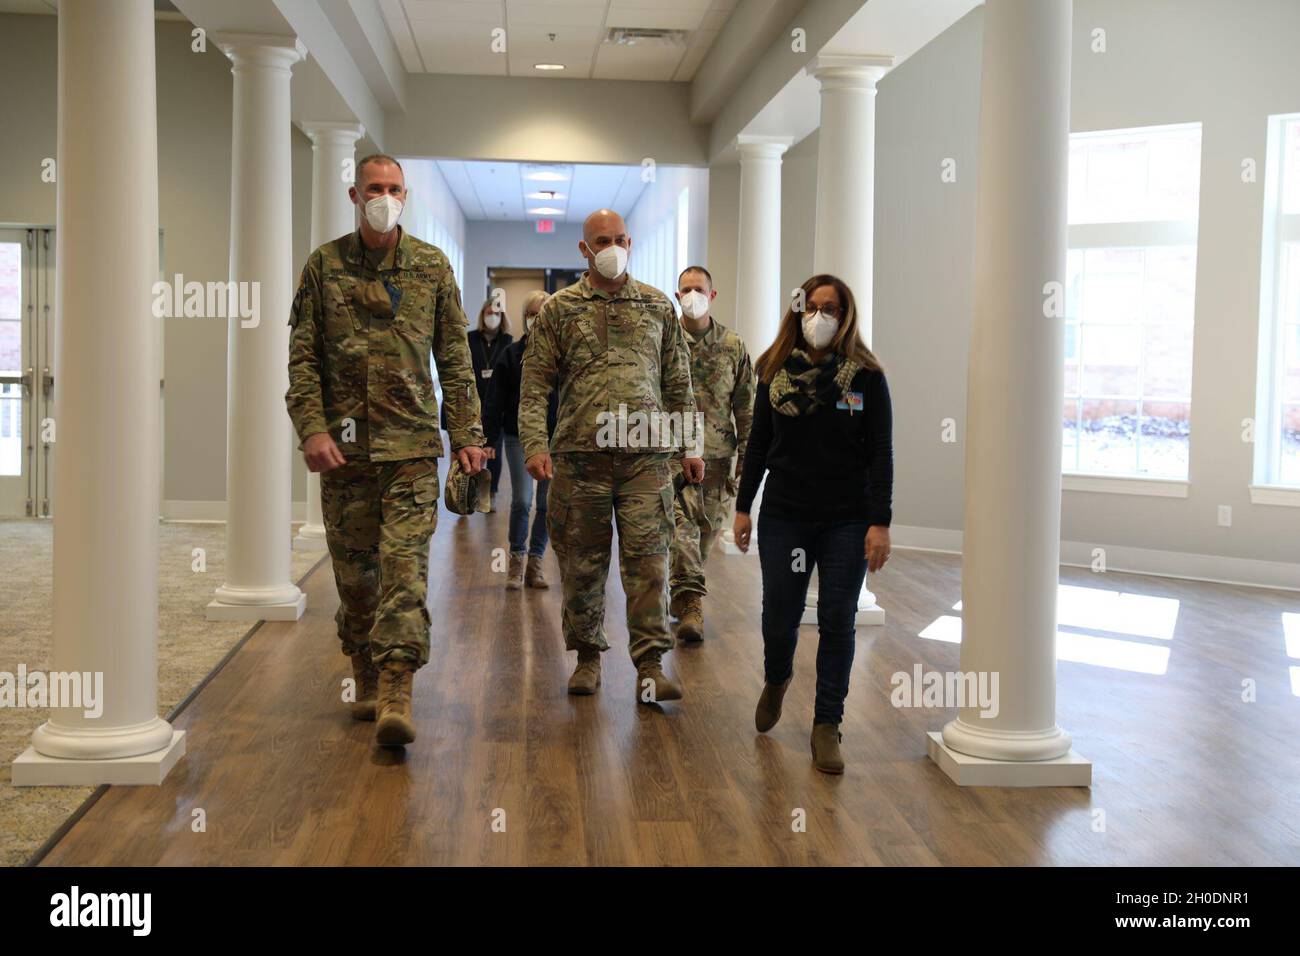 Karen Venis, CEO of Sayre Christian Village, leads Kentucky National Guard leadership through her long term healthcare facility during a command visit in Lexington, Ky., 3 Feb. Kentucky Gov. Andy Beshear directed troops to supplement long term healthcare facilities in COVID 19 hot spots throughout Kentucky. Stock Photo